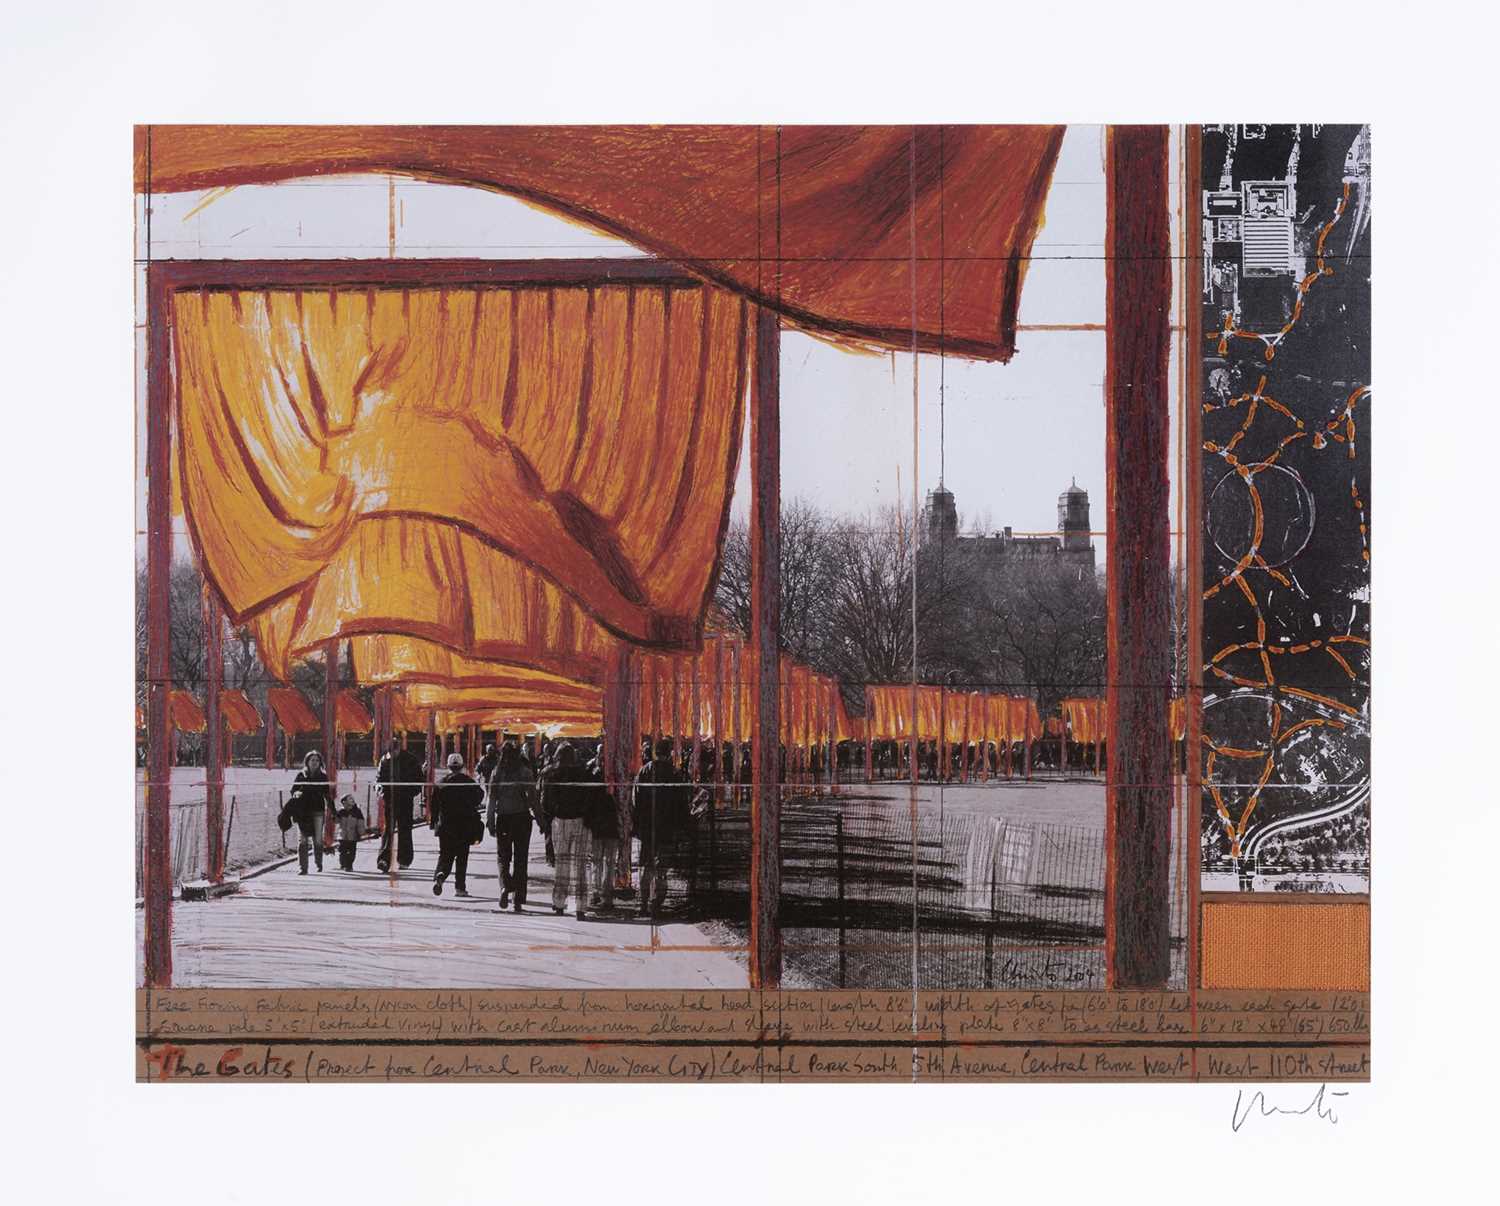 Lot 17 - Christo (Bulgarian 1935-2020), 'The Gates, Project For Central Park, New York City', 2004